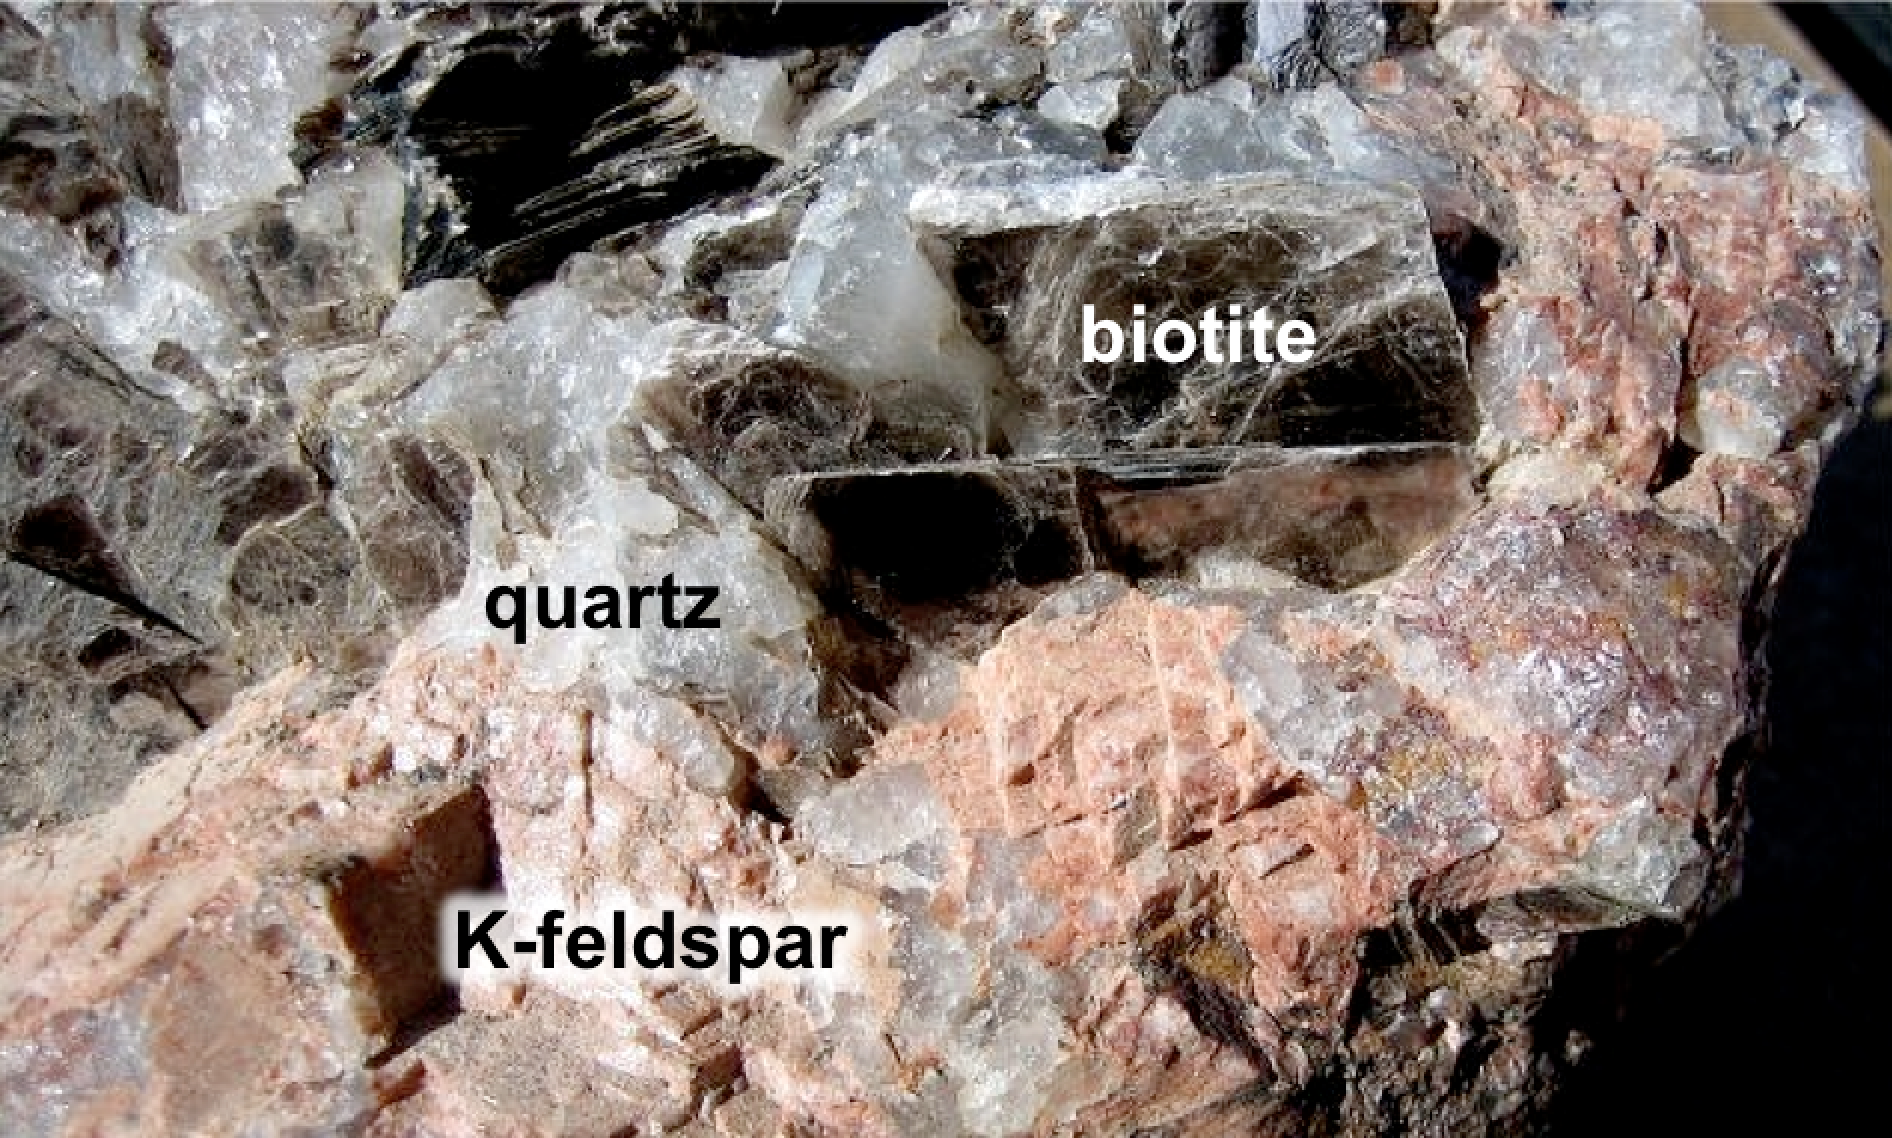 This close-up view of the igneous rock pegmatite shows black biotite crystals, colourless quartz crystals, and pink potassium feldspar crystals. Crystals are mm to cm in scale. _Source: R. Weller/ Cochise College (2011) Permission for non-commercial educational use. (labels added) [view source](http://skywalker.cochise.edu/wellerr/rocks/igrx/pegmatite7.htm)_